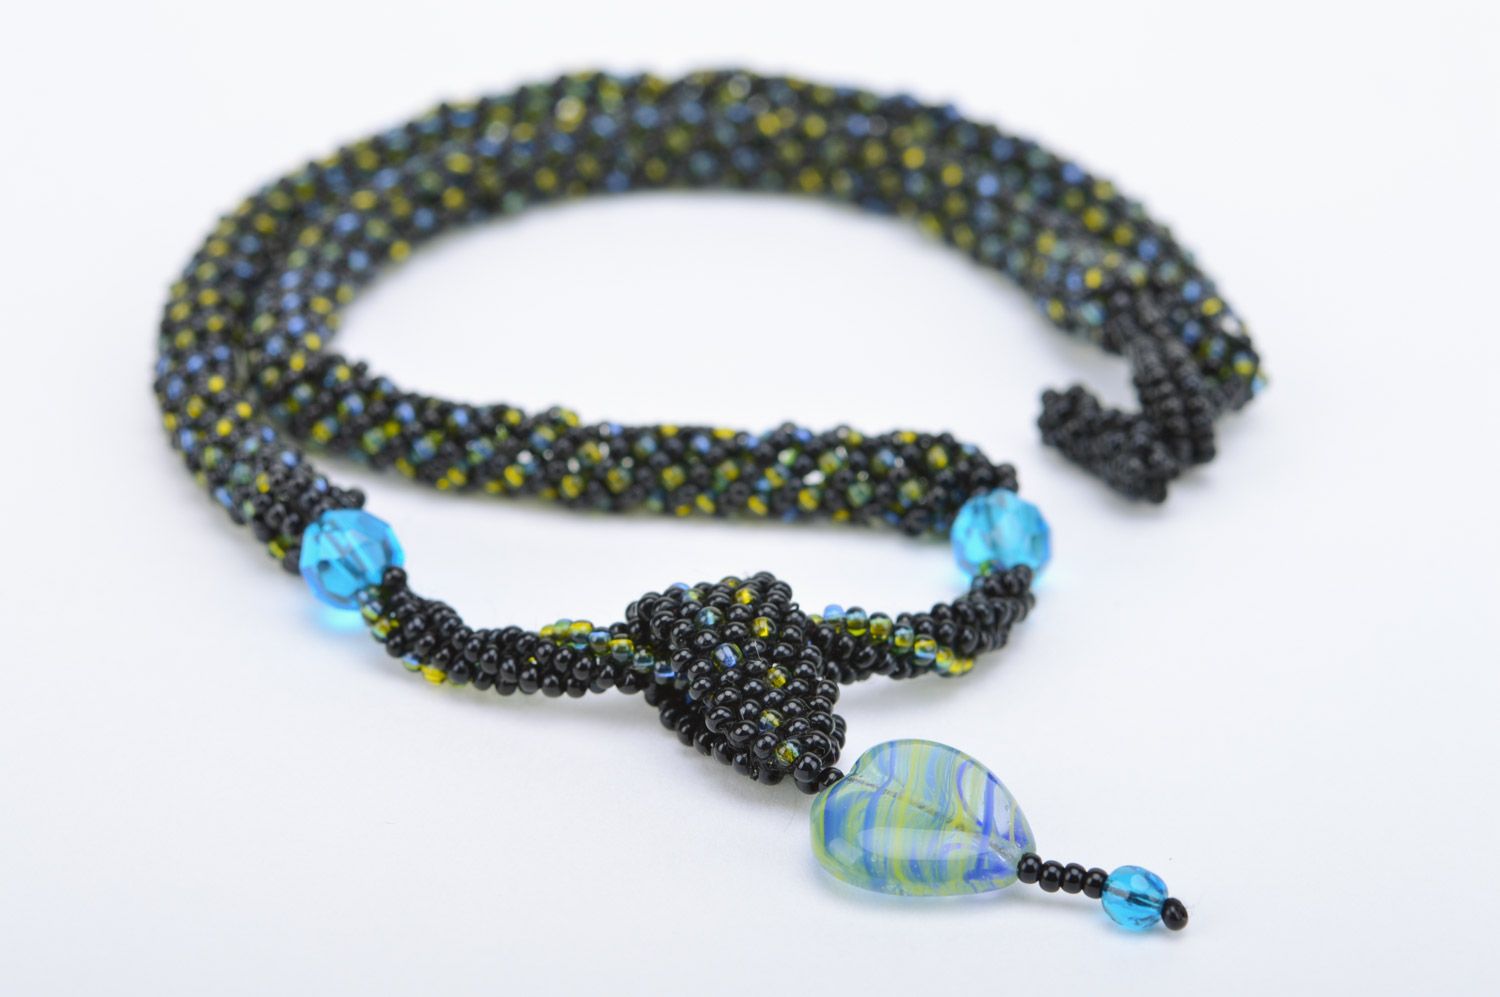 Black handmade beaded cord necklace with heart-shaped pendant photo 4